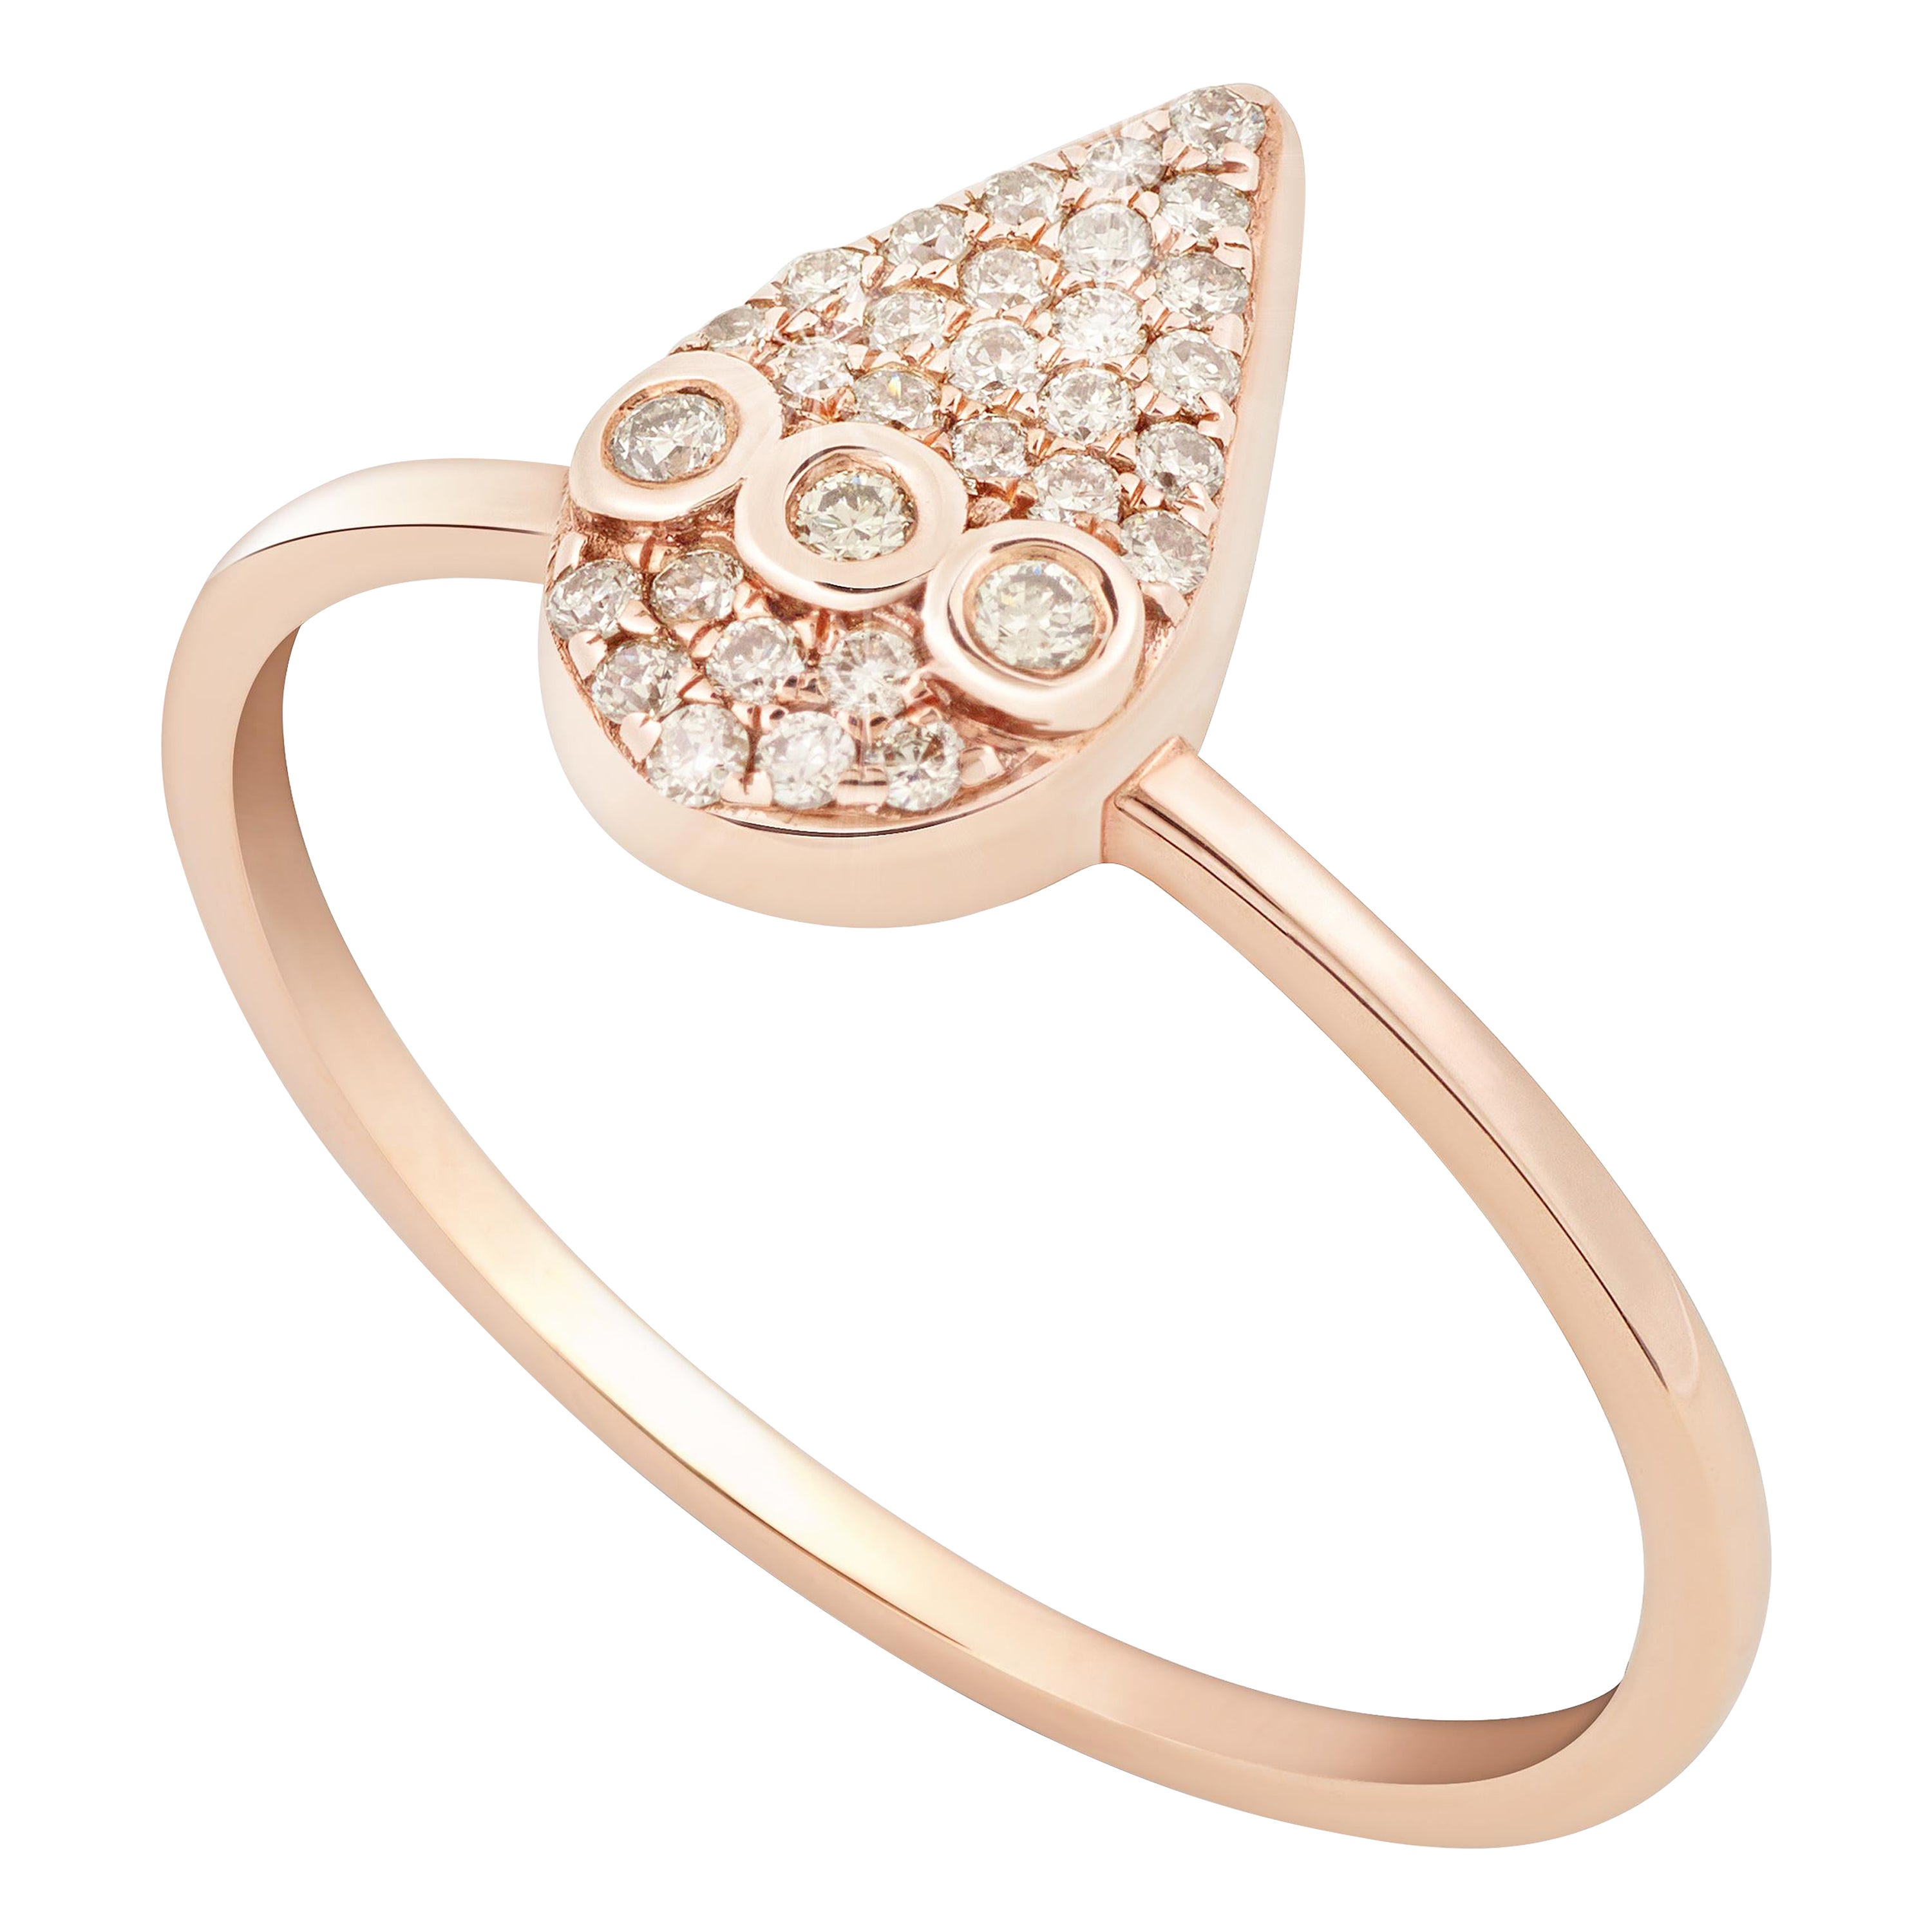 18k rose gold ring with champagne diamond encrusted drop US size 7